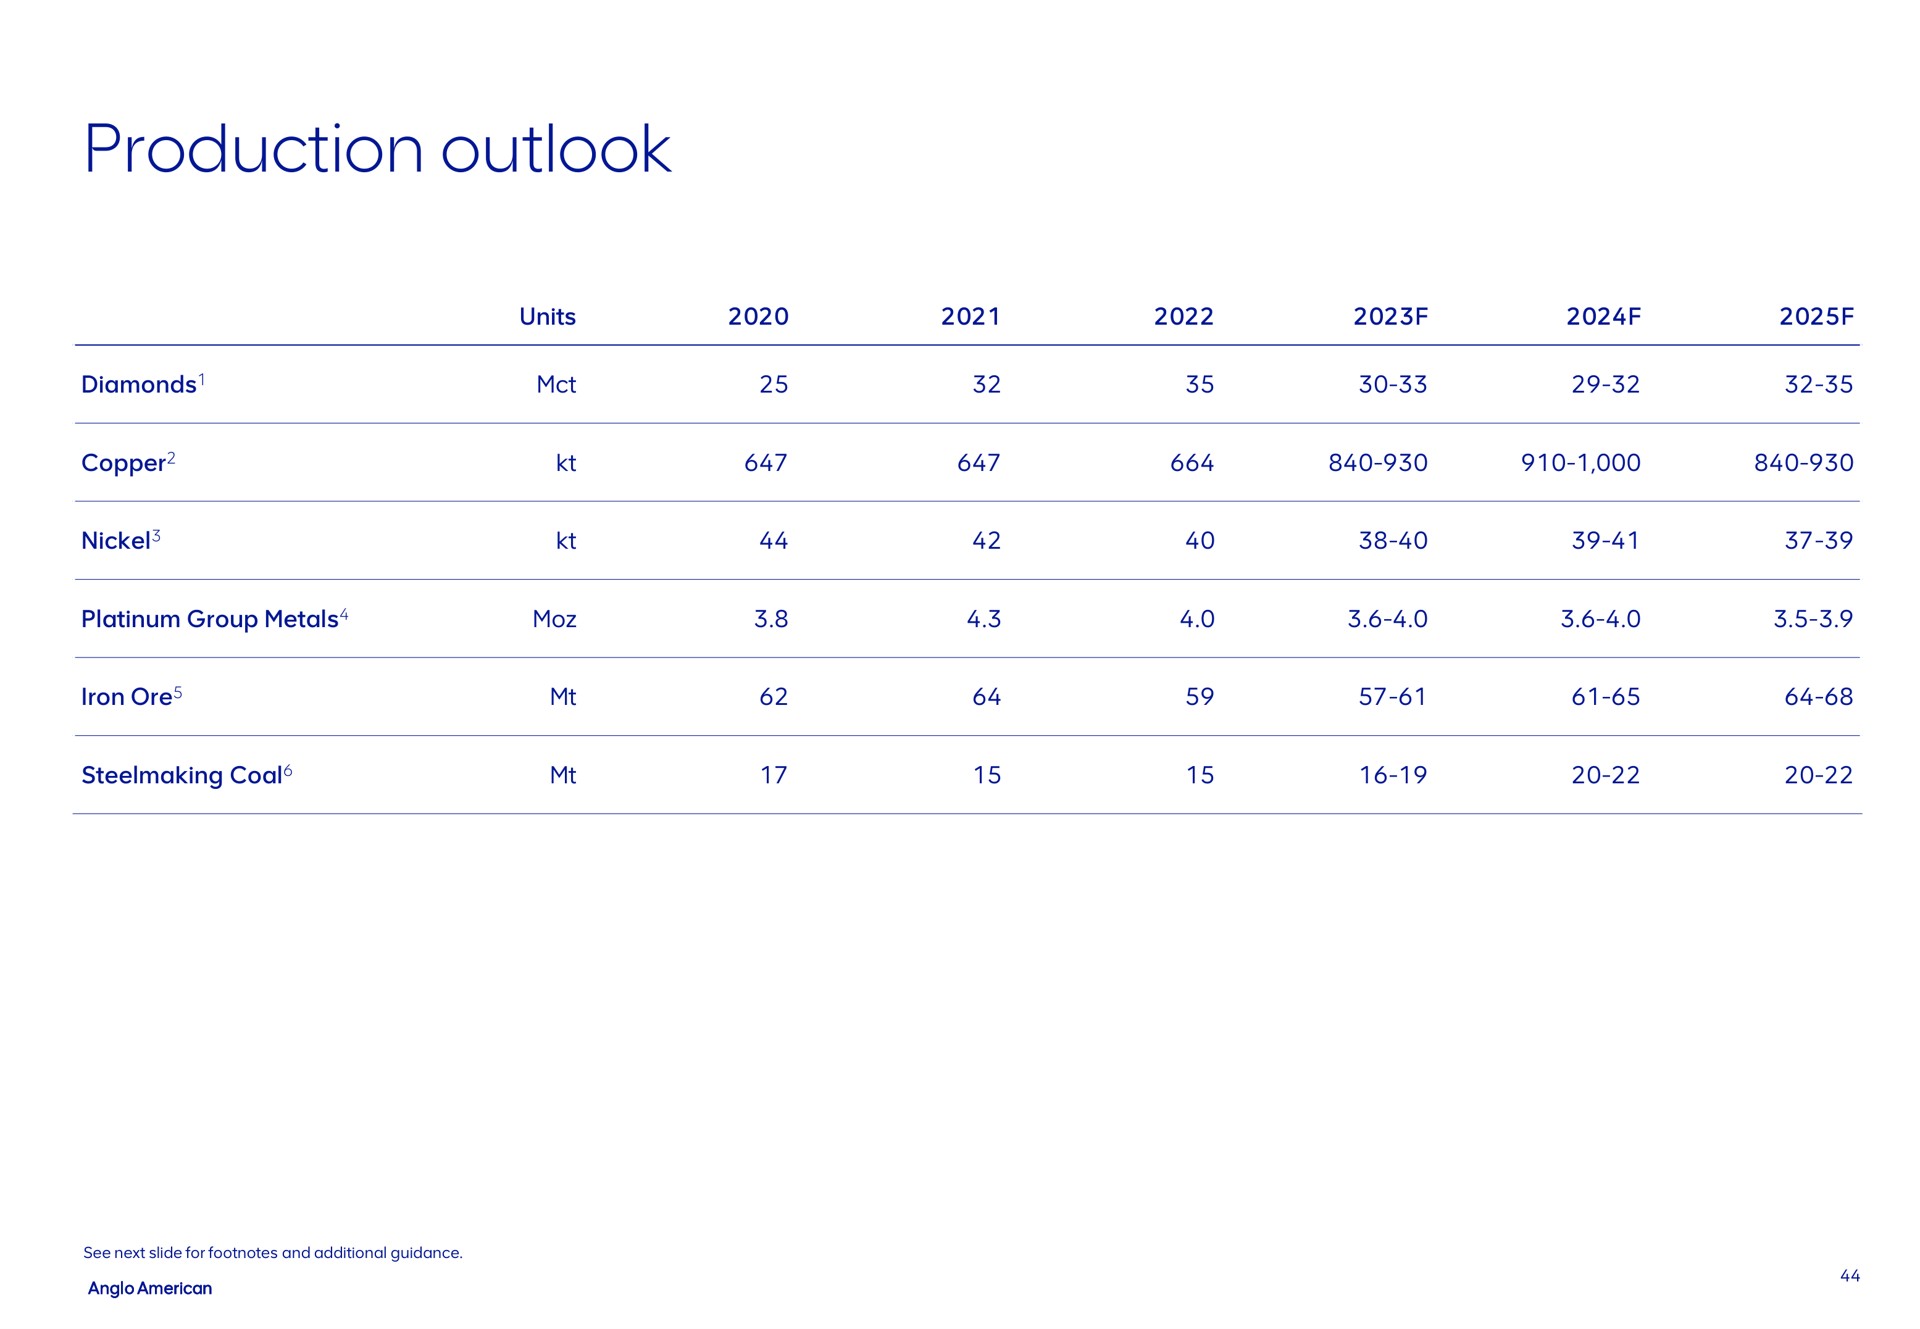 production outlook | AngloAmerican